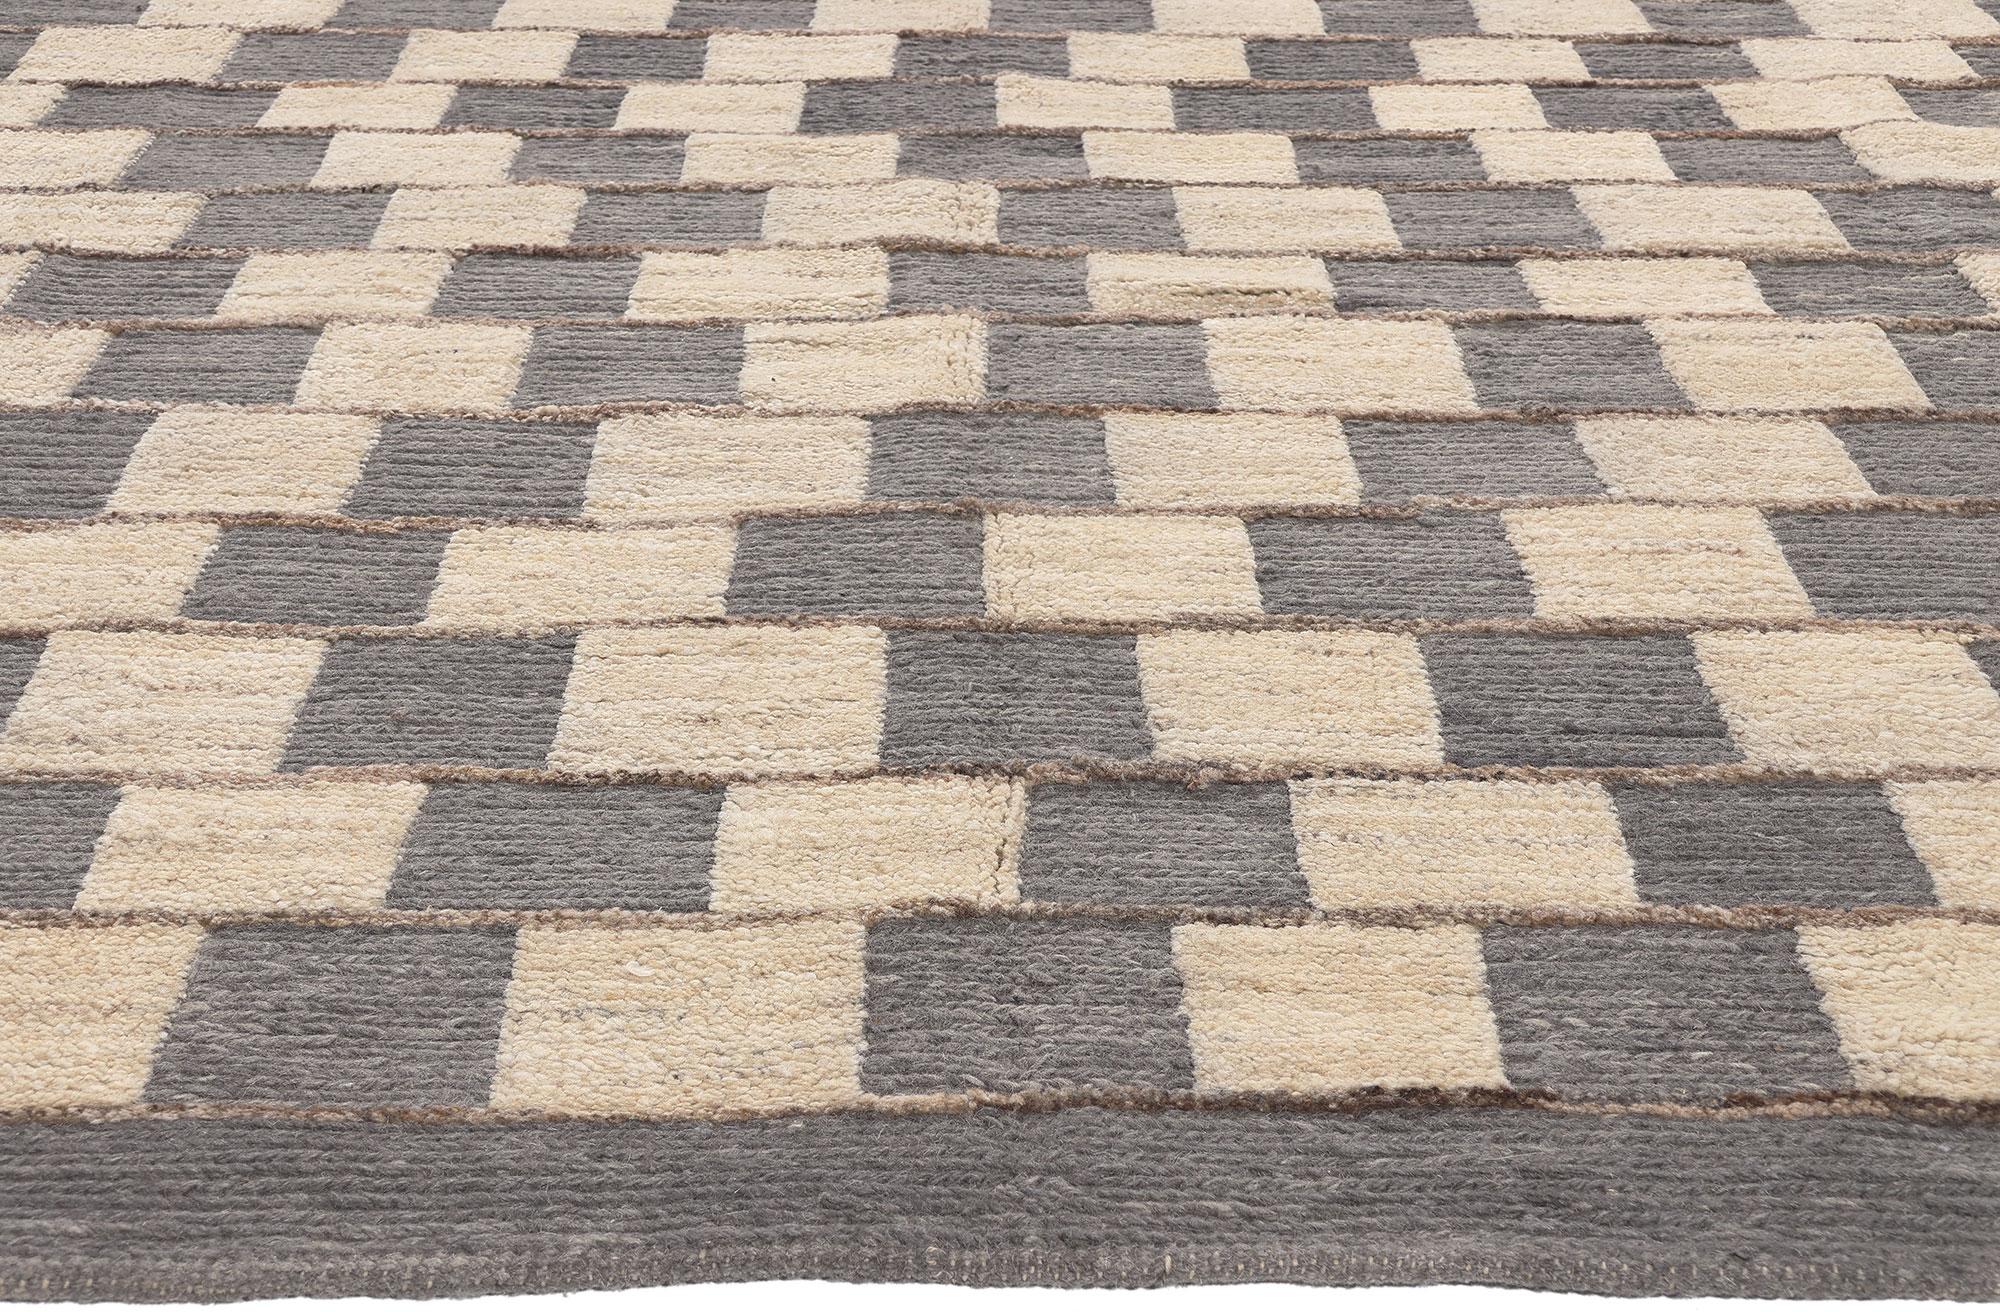 Pakistani Organic Brutalist Moroccan Textured Rug Neutral Earth-Tones For Sale